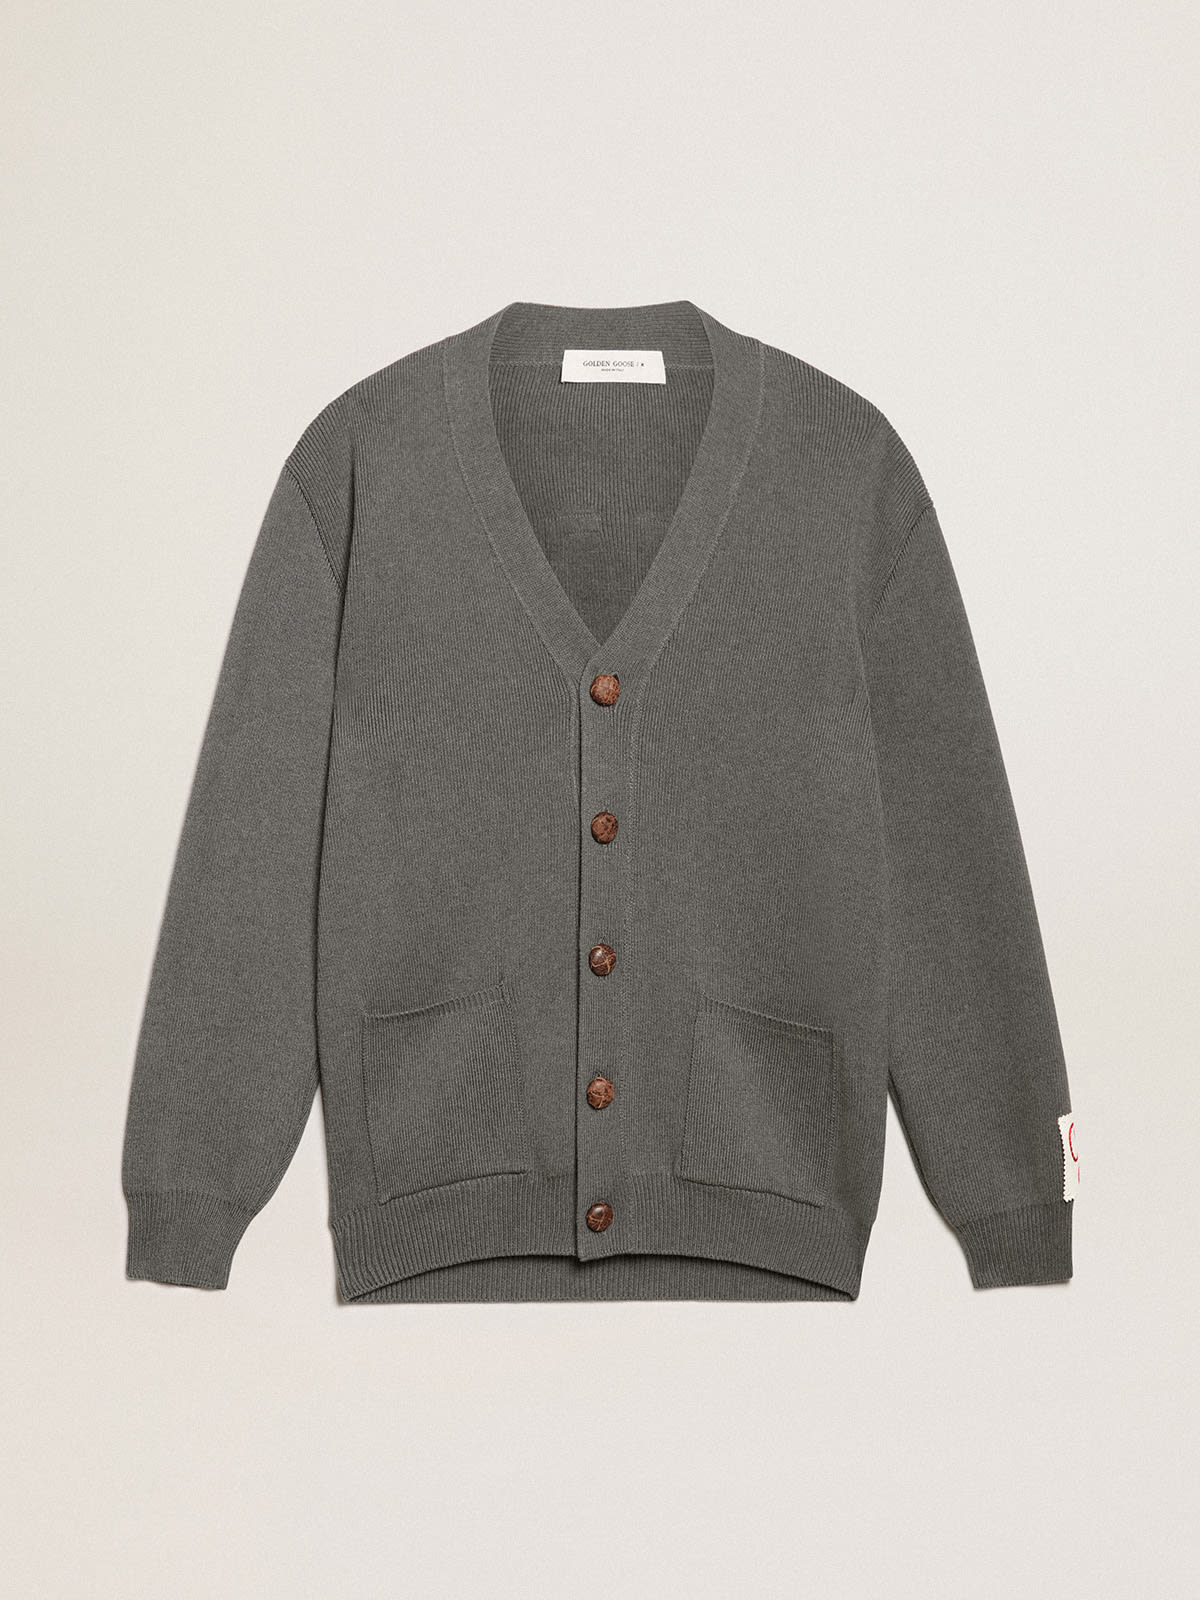 Golden Goose - Men's cardigan in mélange gray cotton with logo on the back in 